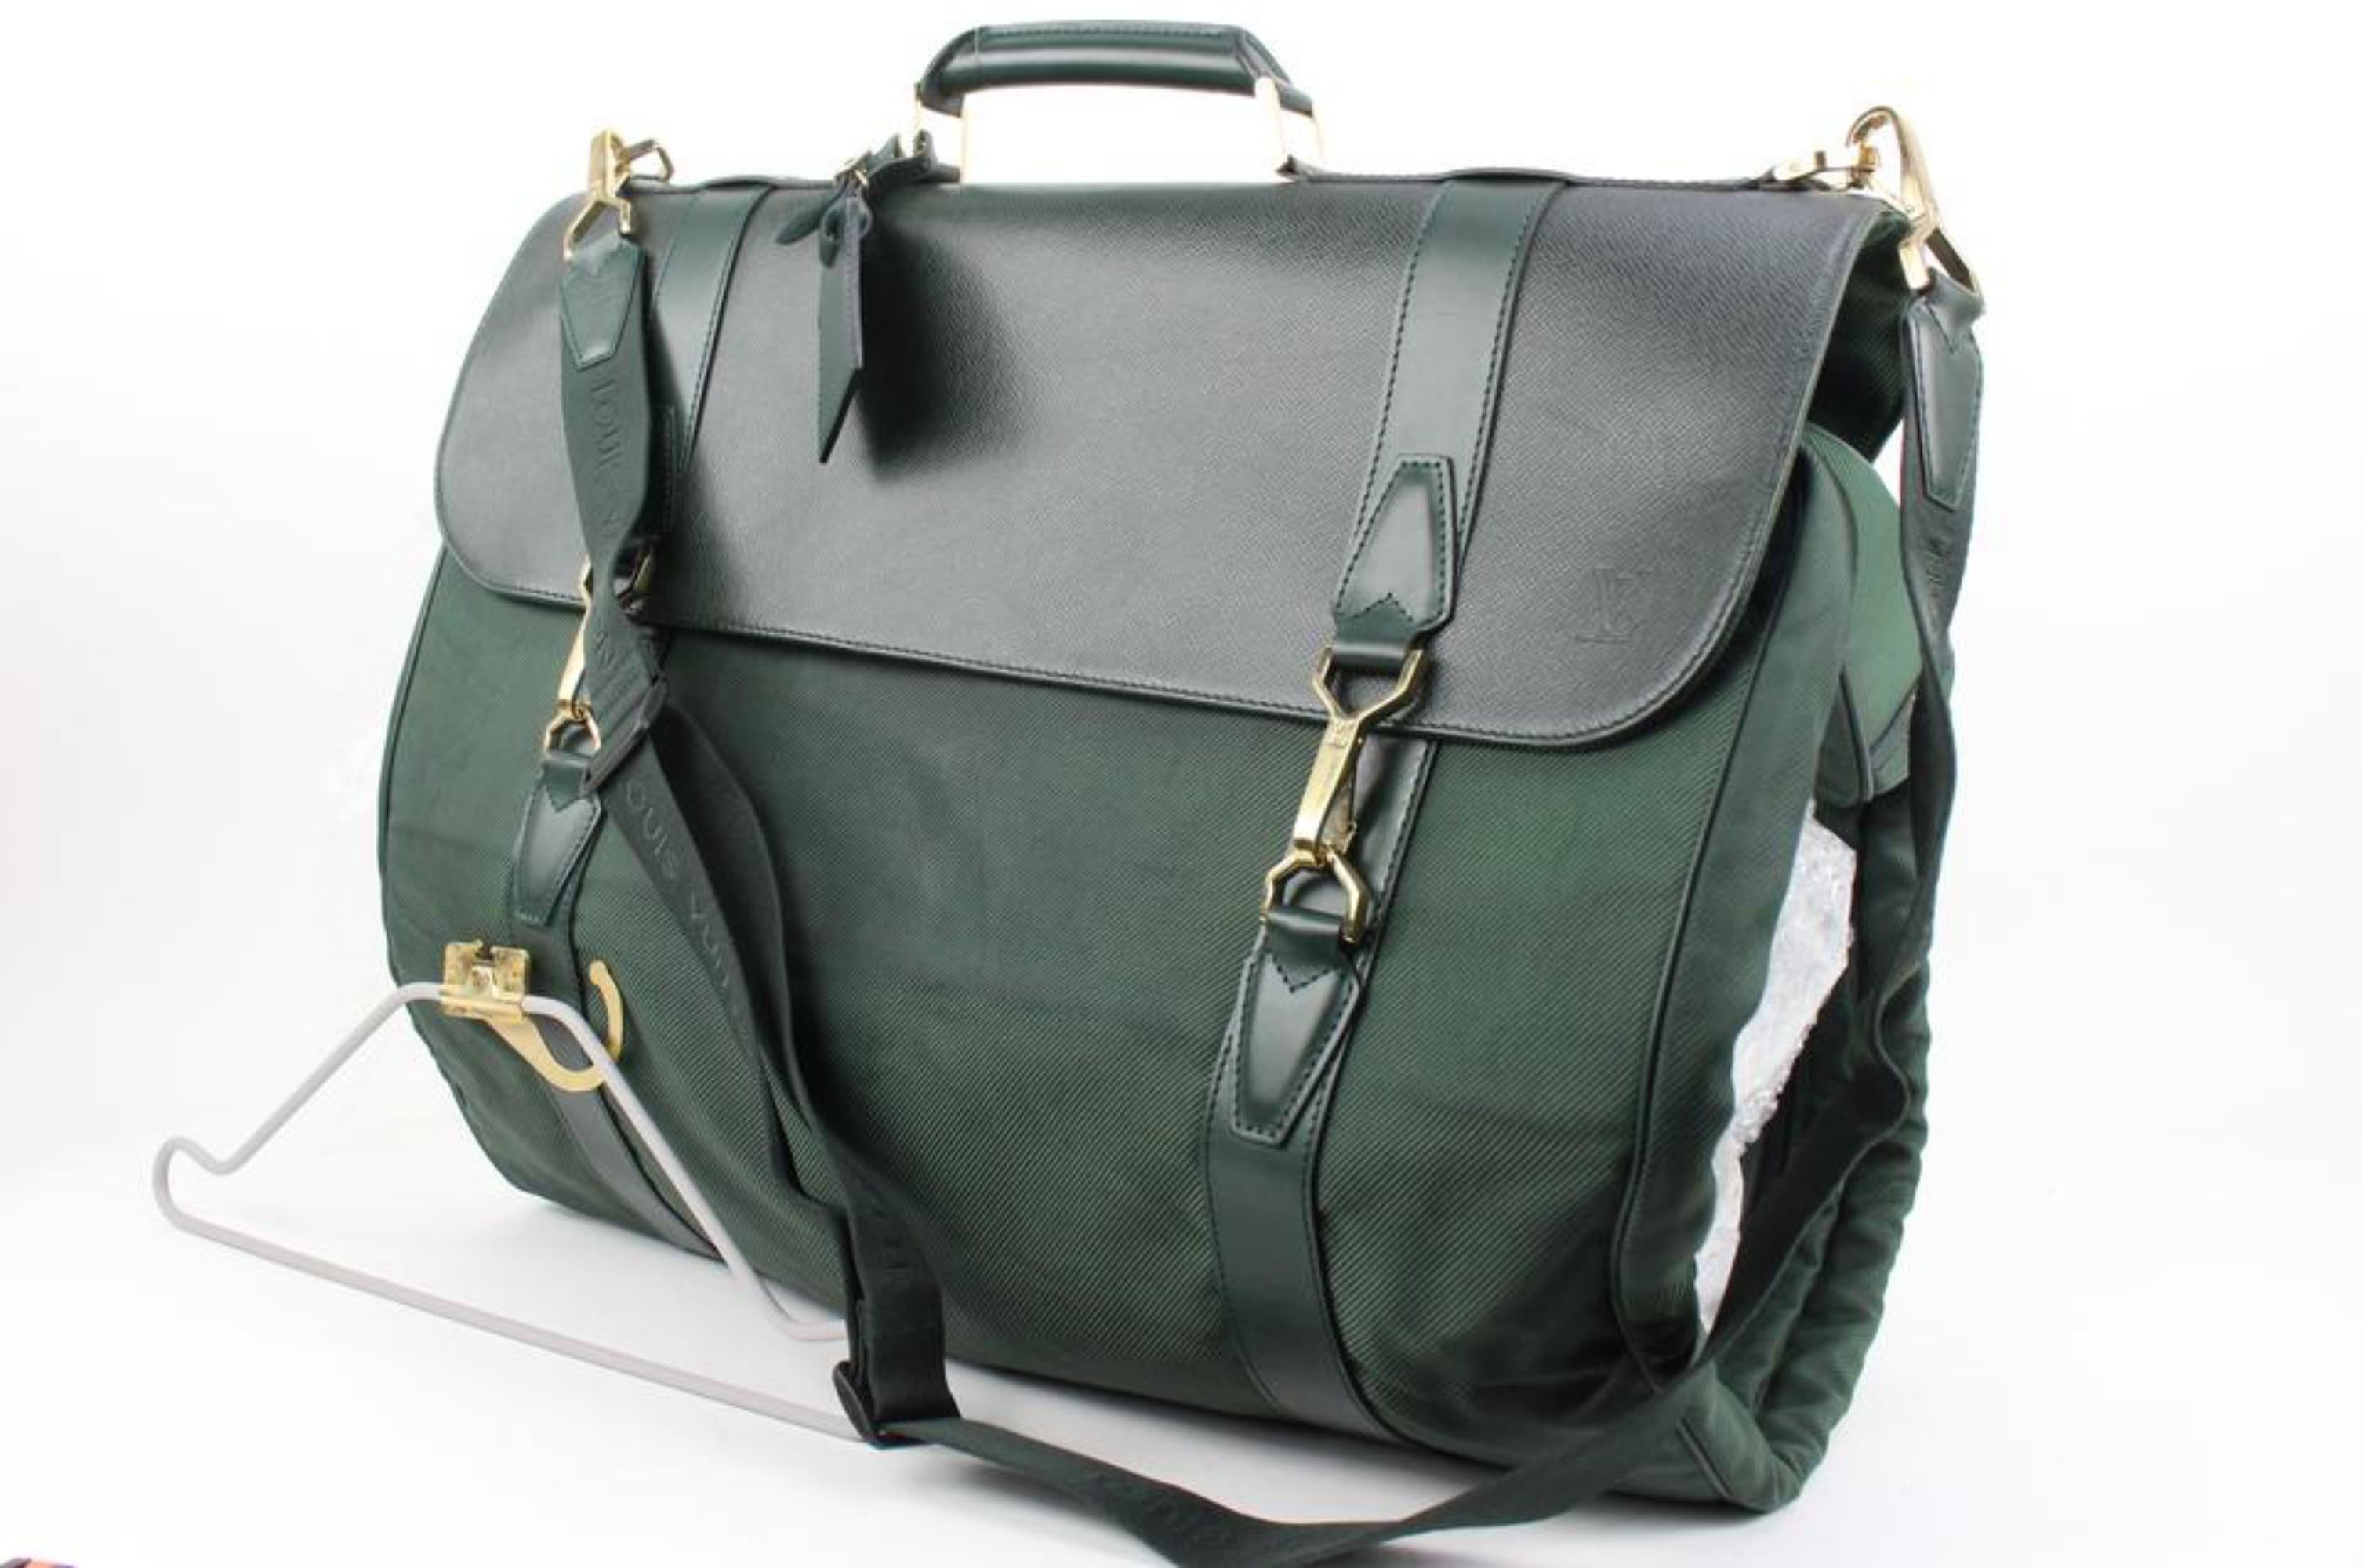 Louis Vuitton Green Taiga Leather Gibeciere Garment Porte Cabine 45lk5
Date Code/Serial Number: BA0011
Made In: France
Measurements: Length:  22